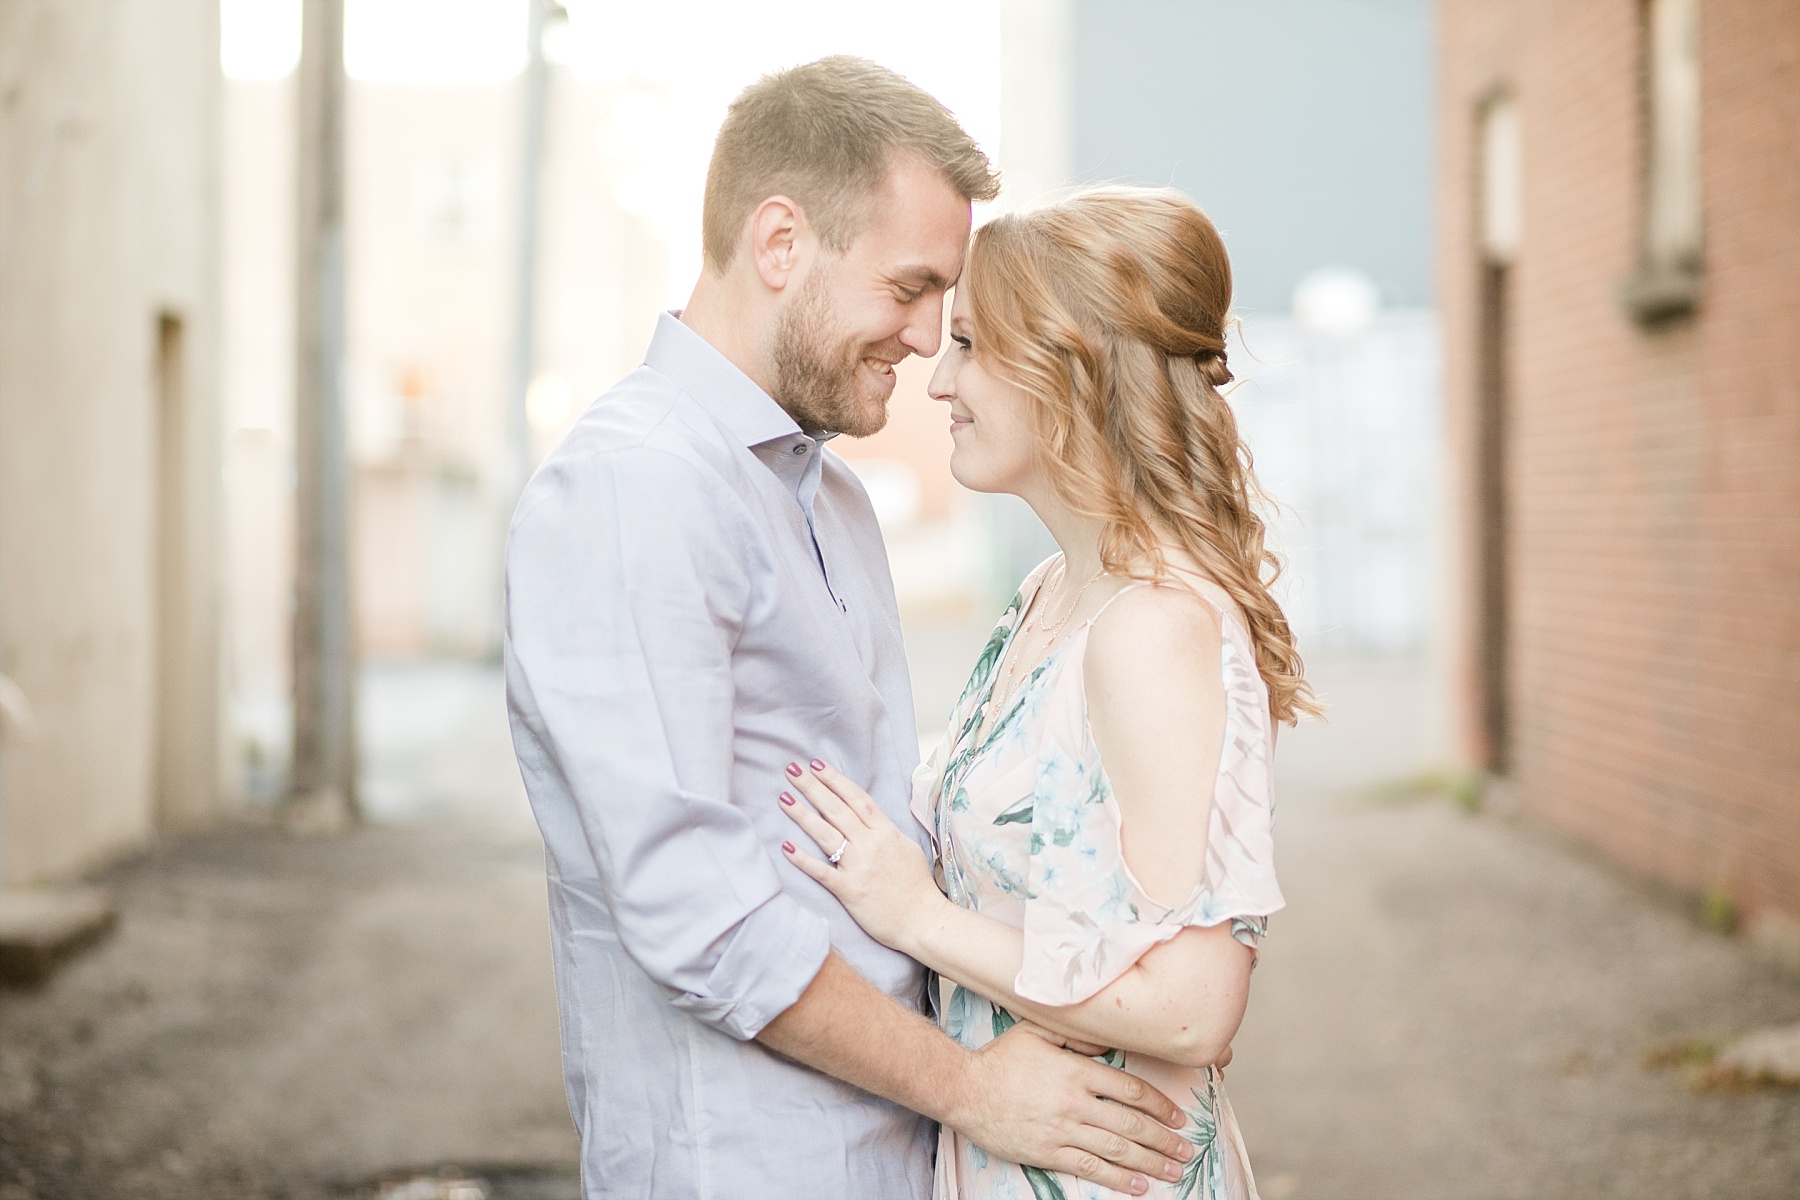 Kirstie & Erik explored the place they got engaged for their Chippewa Falls engagement photos.